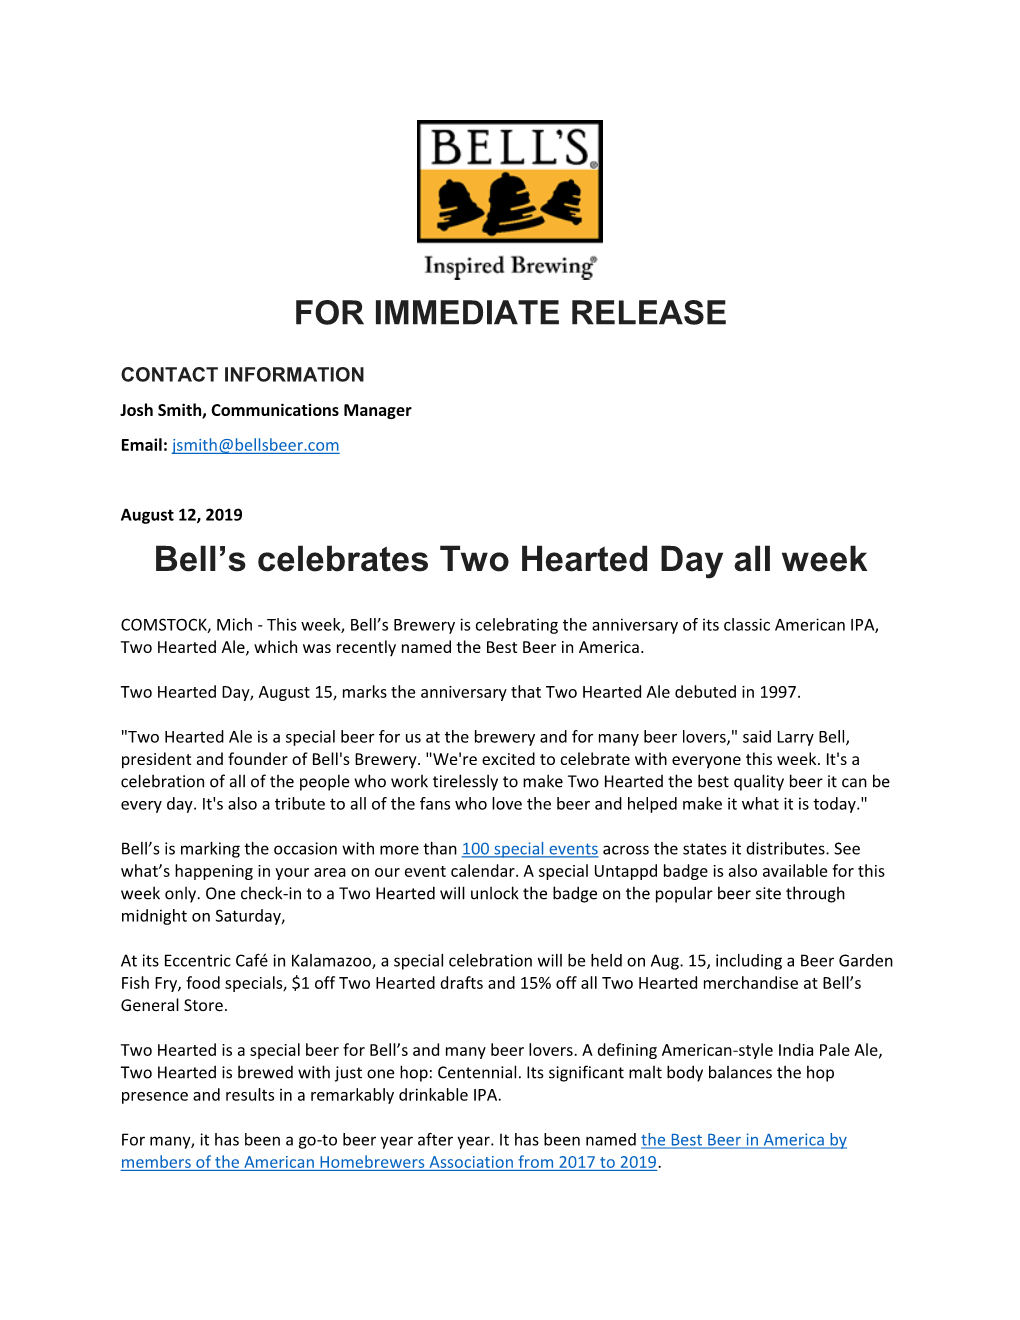 Bell's Celebrates Two Hearted Day All Week